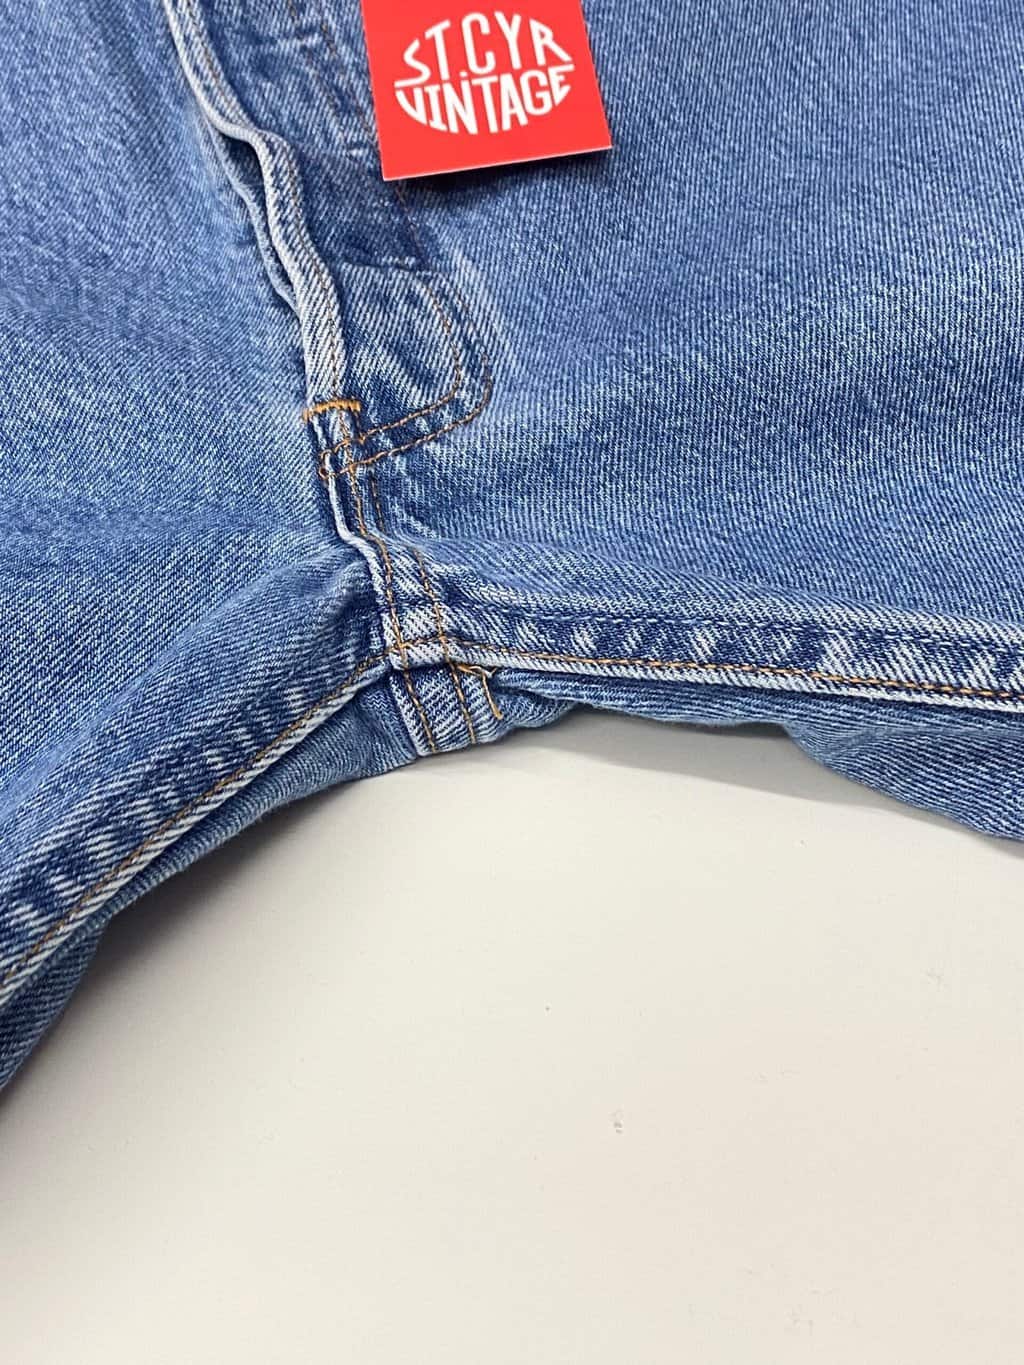 90s vintage Levis 501 jeans USA made blue stonewash with red tab